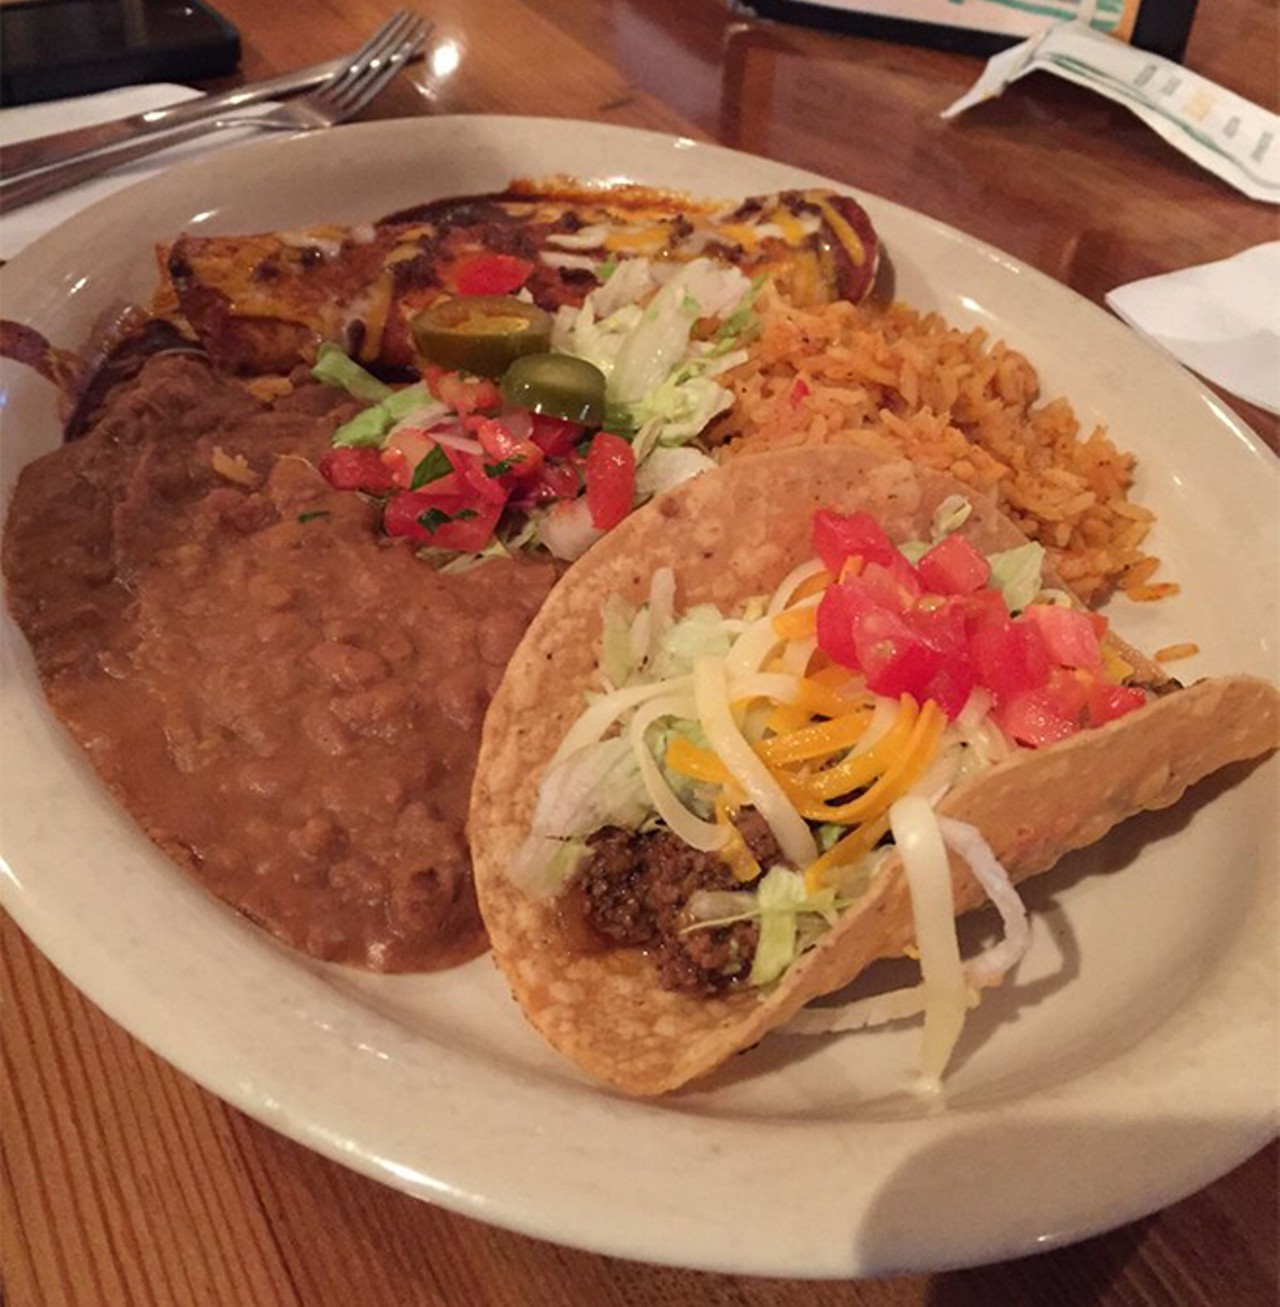 Chuy's Tex-Mex
multiple locations
The hand-rolled tortillas at Chuy's give it the one-up over other taco chains. Have a go at one of their baja tacos made with grilled fish or shrimp, cilantro, red cabbage and creamy jalape&ntilde;o.
Photo via Yelp